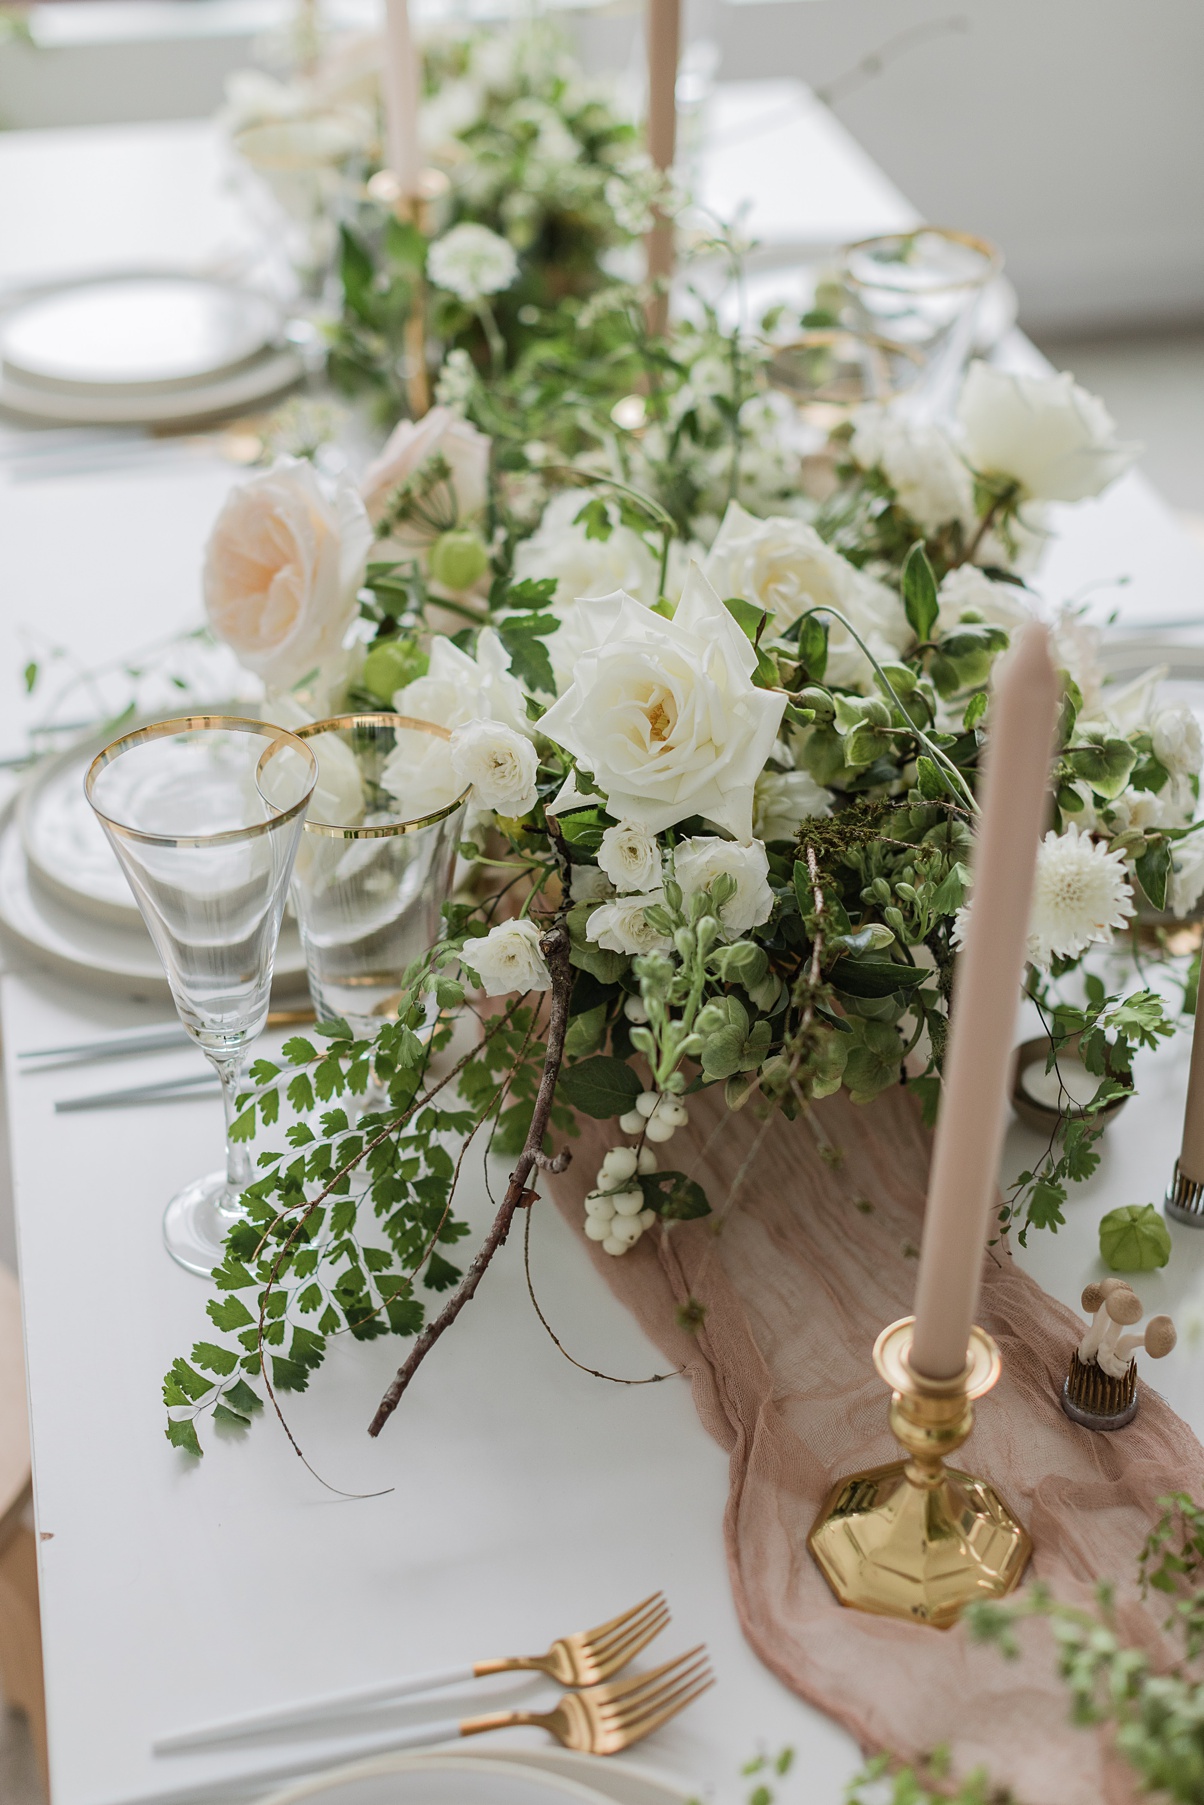 A floral centerpiece with maidenhair fern and roses